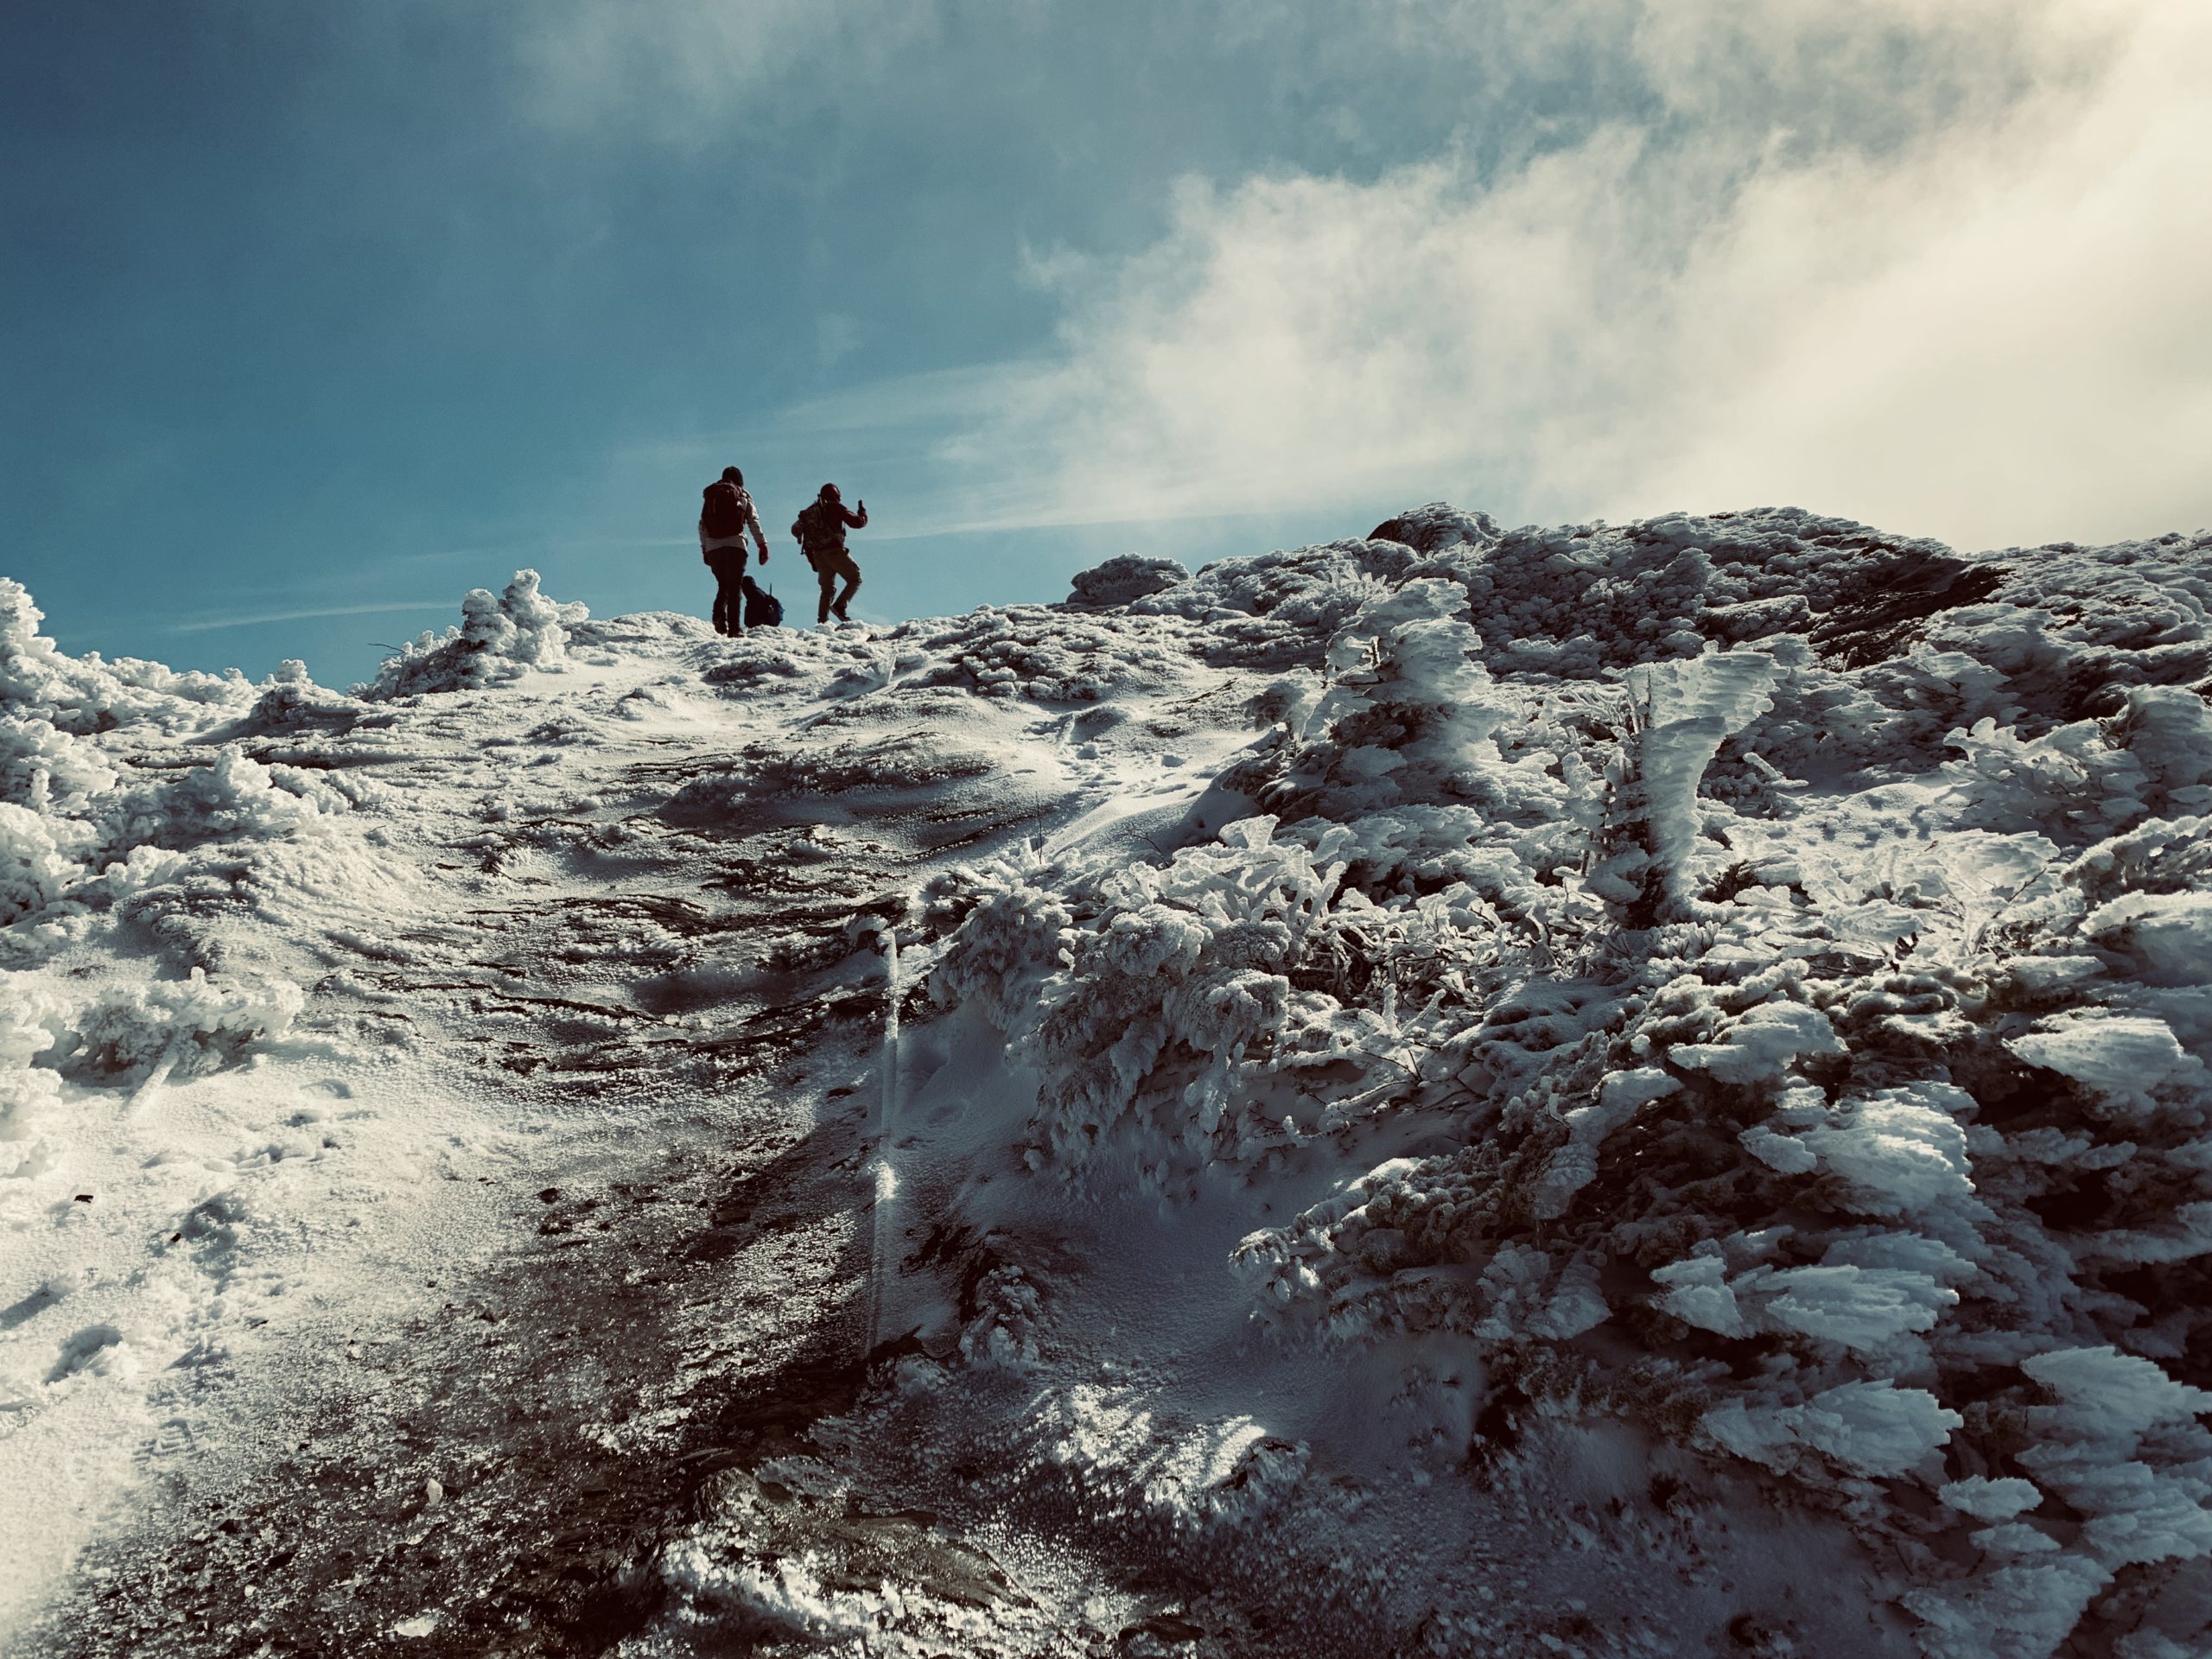 Winter hiking is one season where joining a group is essential